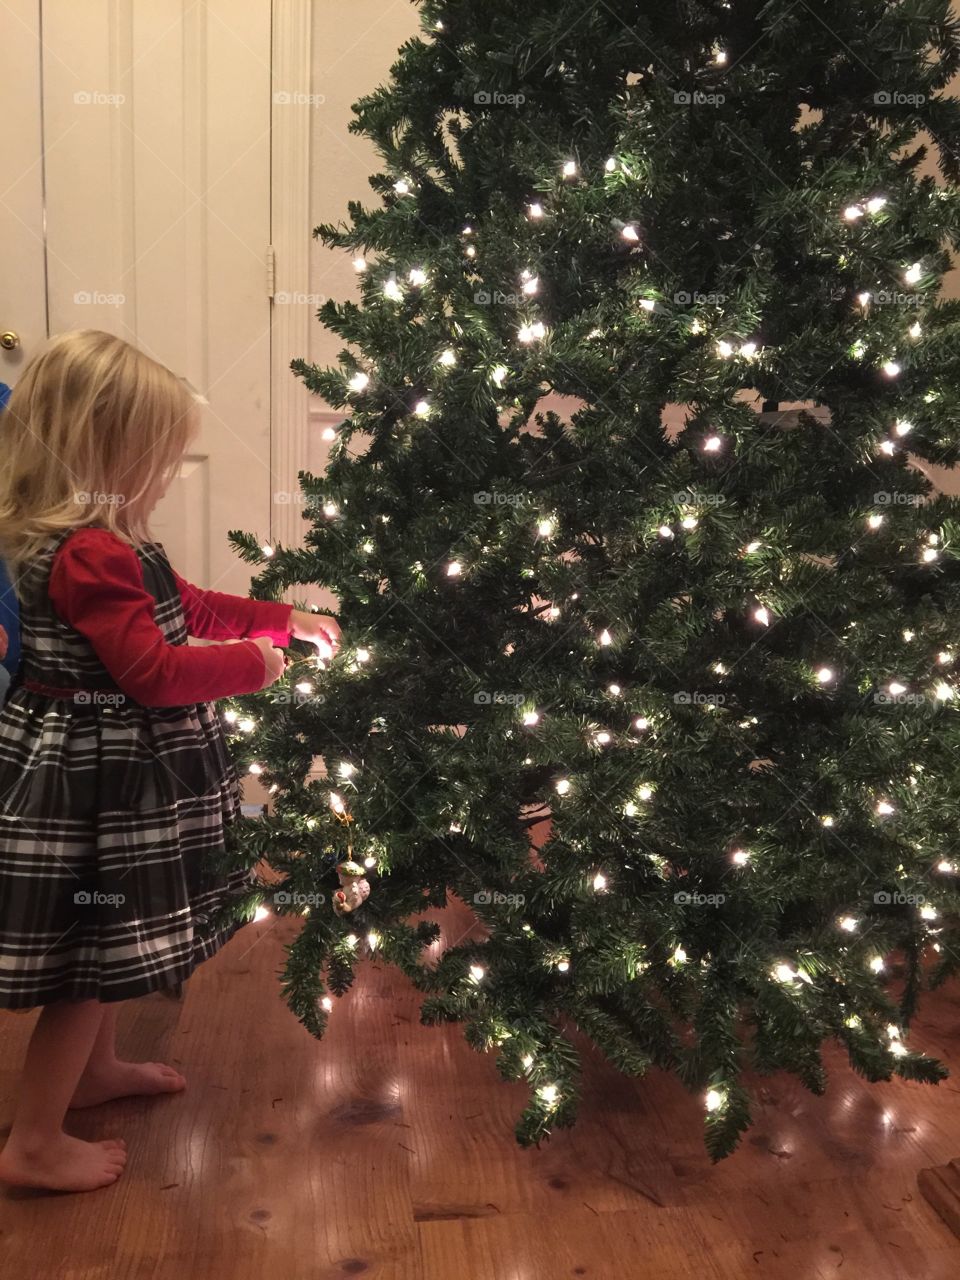 Toddler decorating Tree. Girl helps decorate Christmas tree